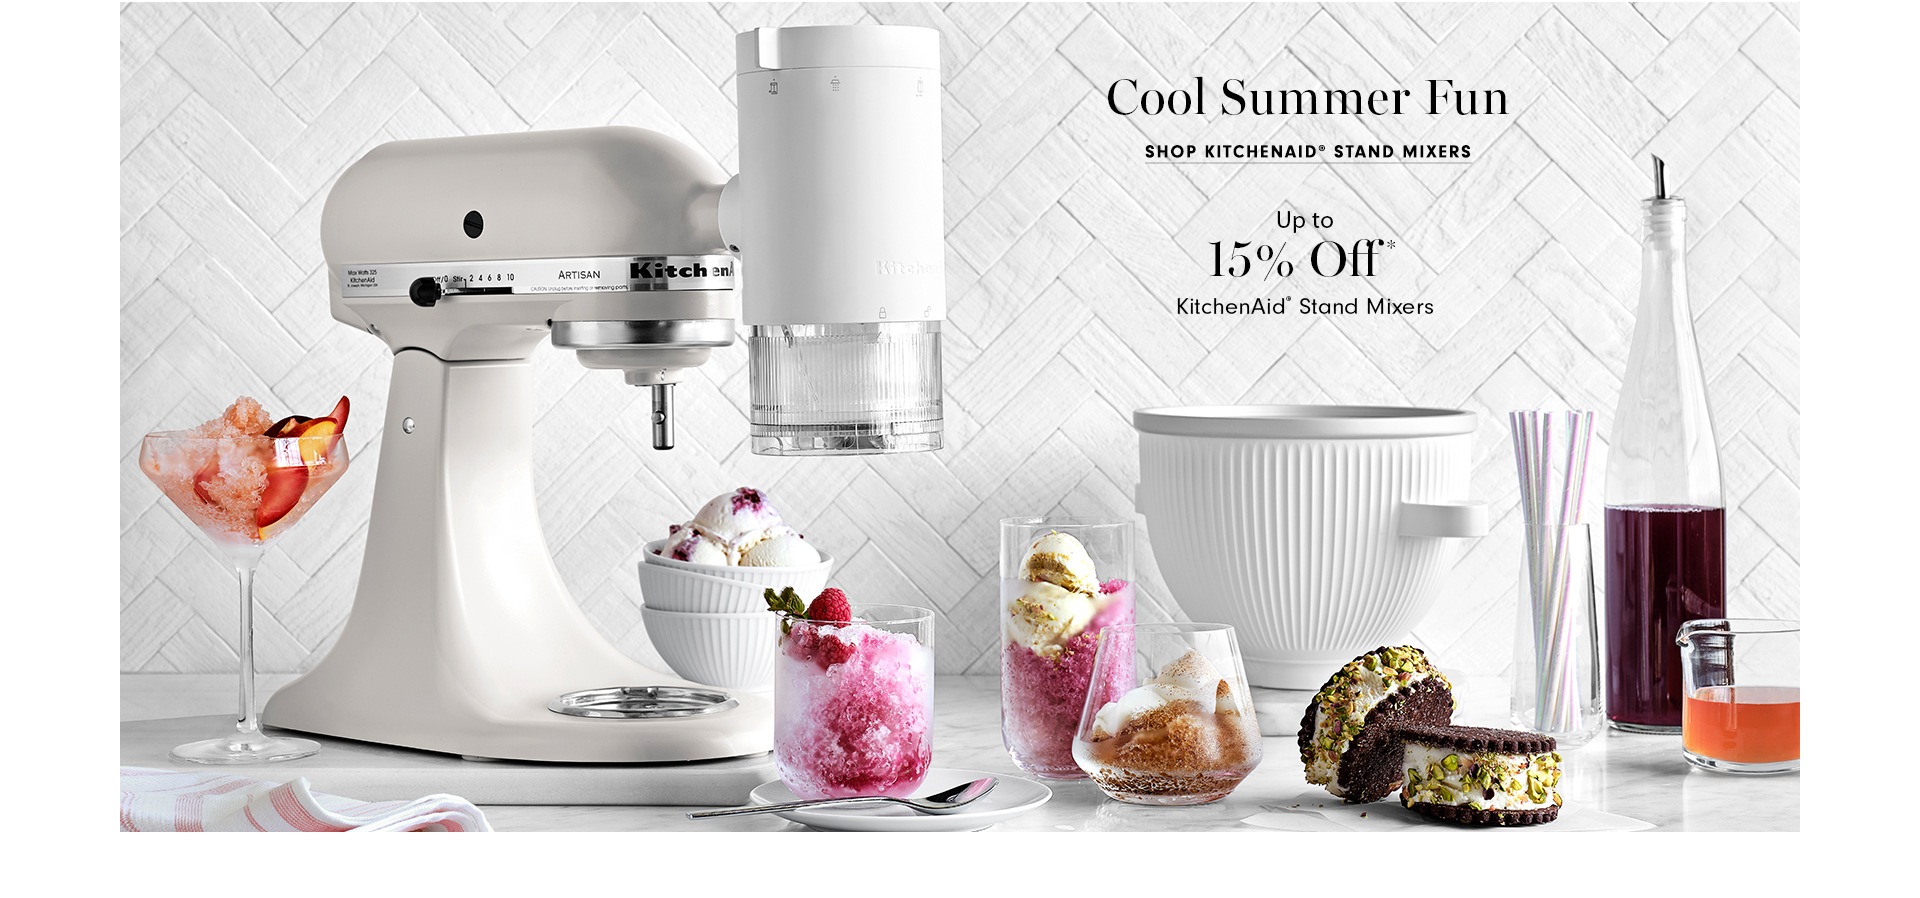 Up to 15% Off KitchenAid® Stand Mixers*